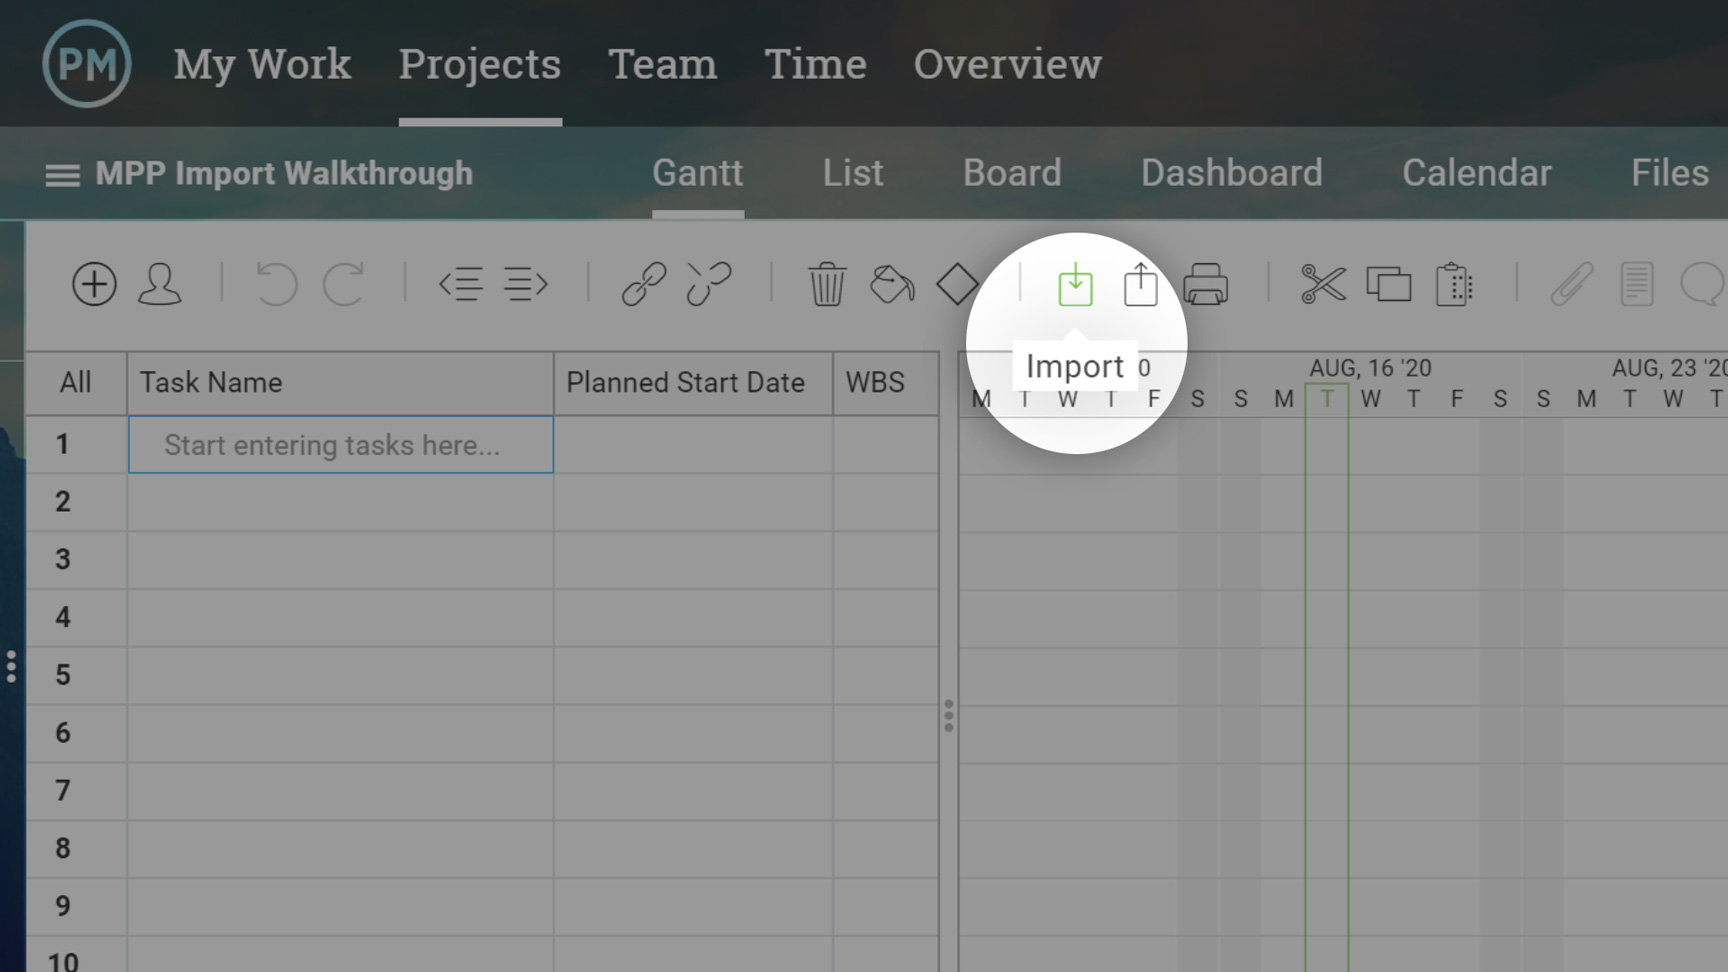 Importing MPP Files into ProjectManager.com is easily done from the Gantt View